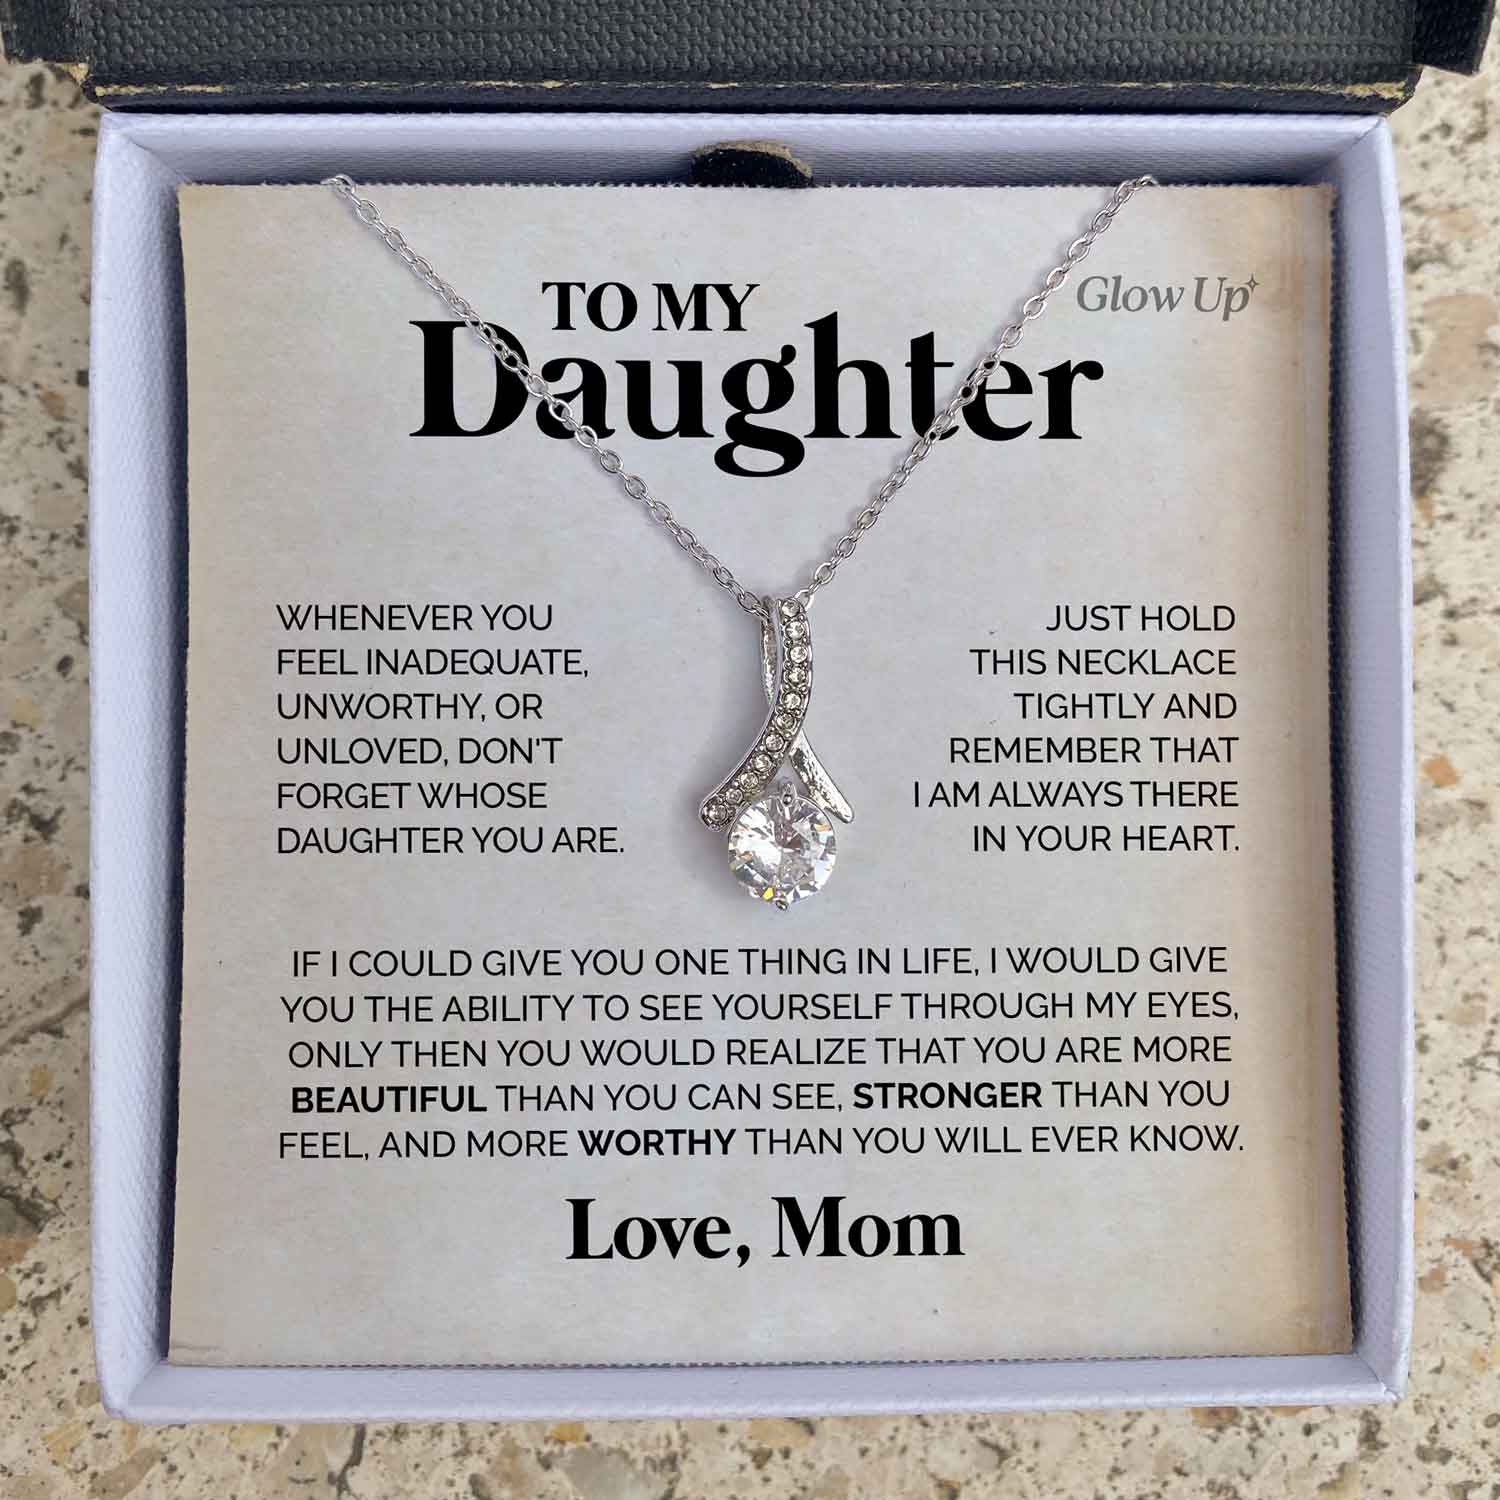 ShineOn Fulfillment Jewelry 14K White Gold Finish / Two-Toned Box To My Daughter - You are in my heart - Ribbon Necklace